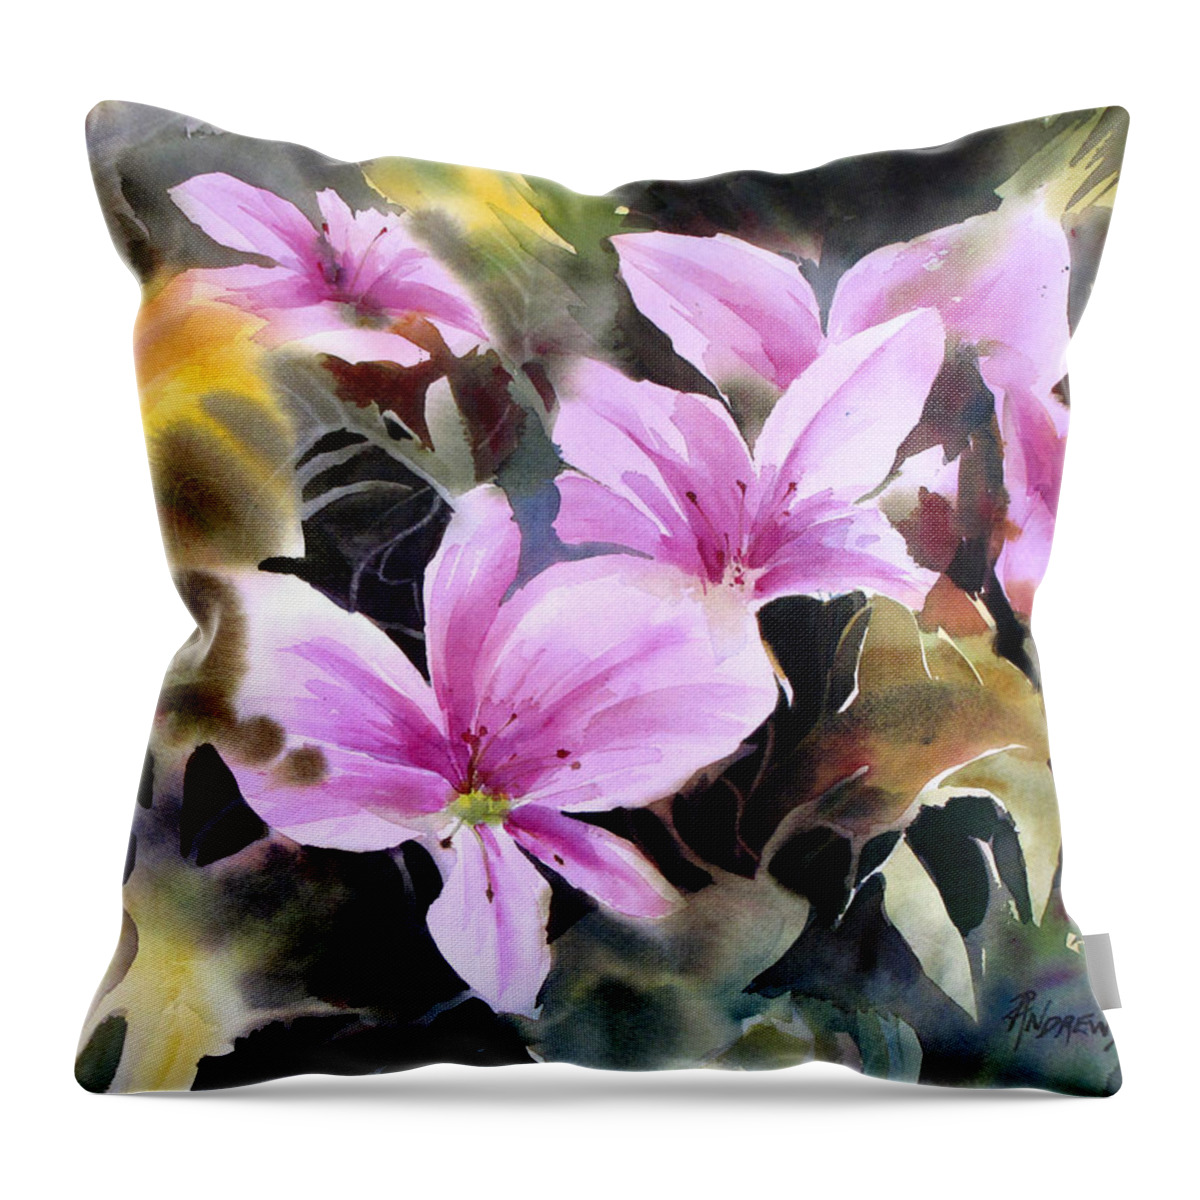 Floral Throw Pillow featuring the painting Pink Prize by Rae Andrews